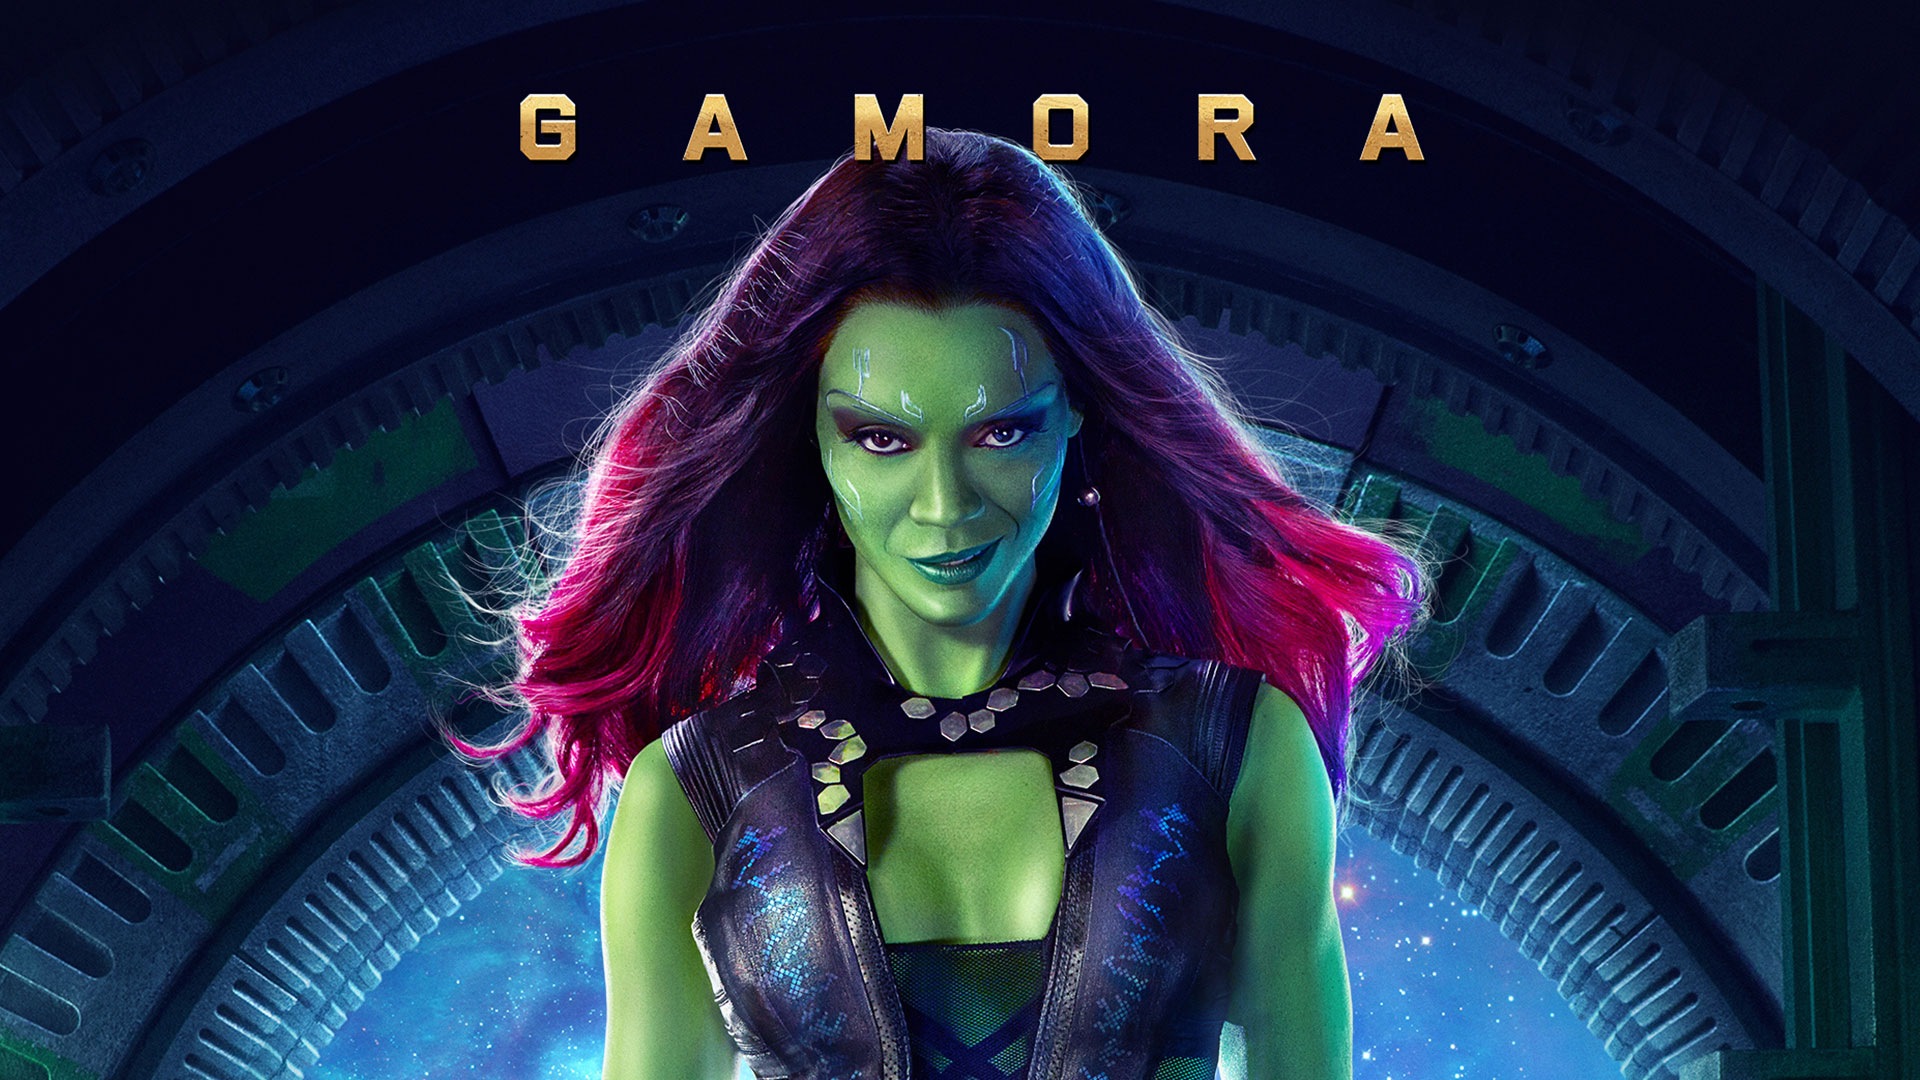 Guardians of the Galaxy 2014 HD movie wallpapers #7 - 1920x1080